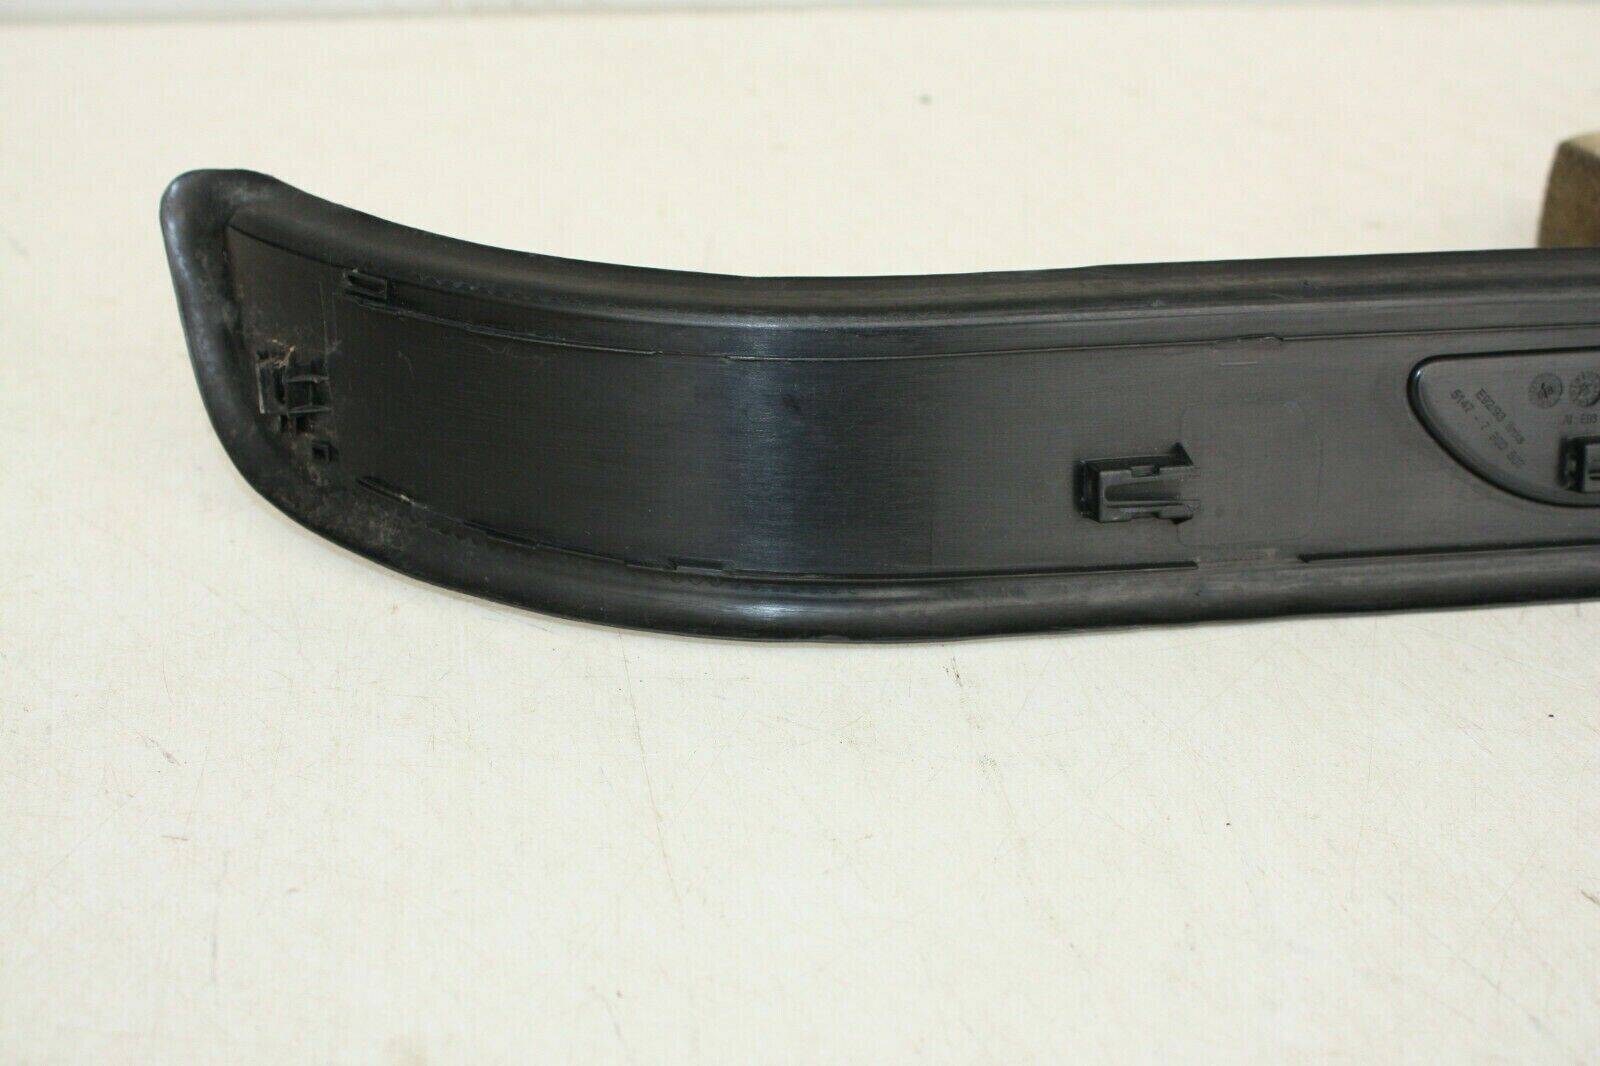 BMW-3-SERIES-FRONT-LEFT-DOOR-ENTRANCE-SILL-STRIP-2006-TO-2010-175431720438-6